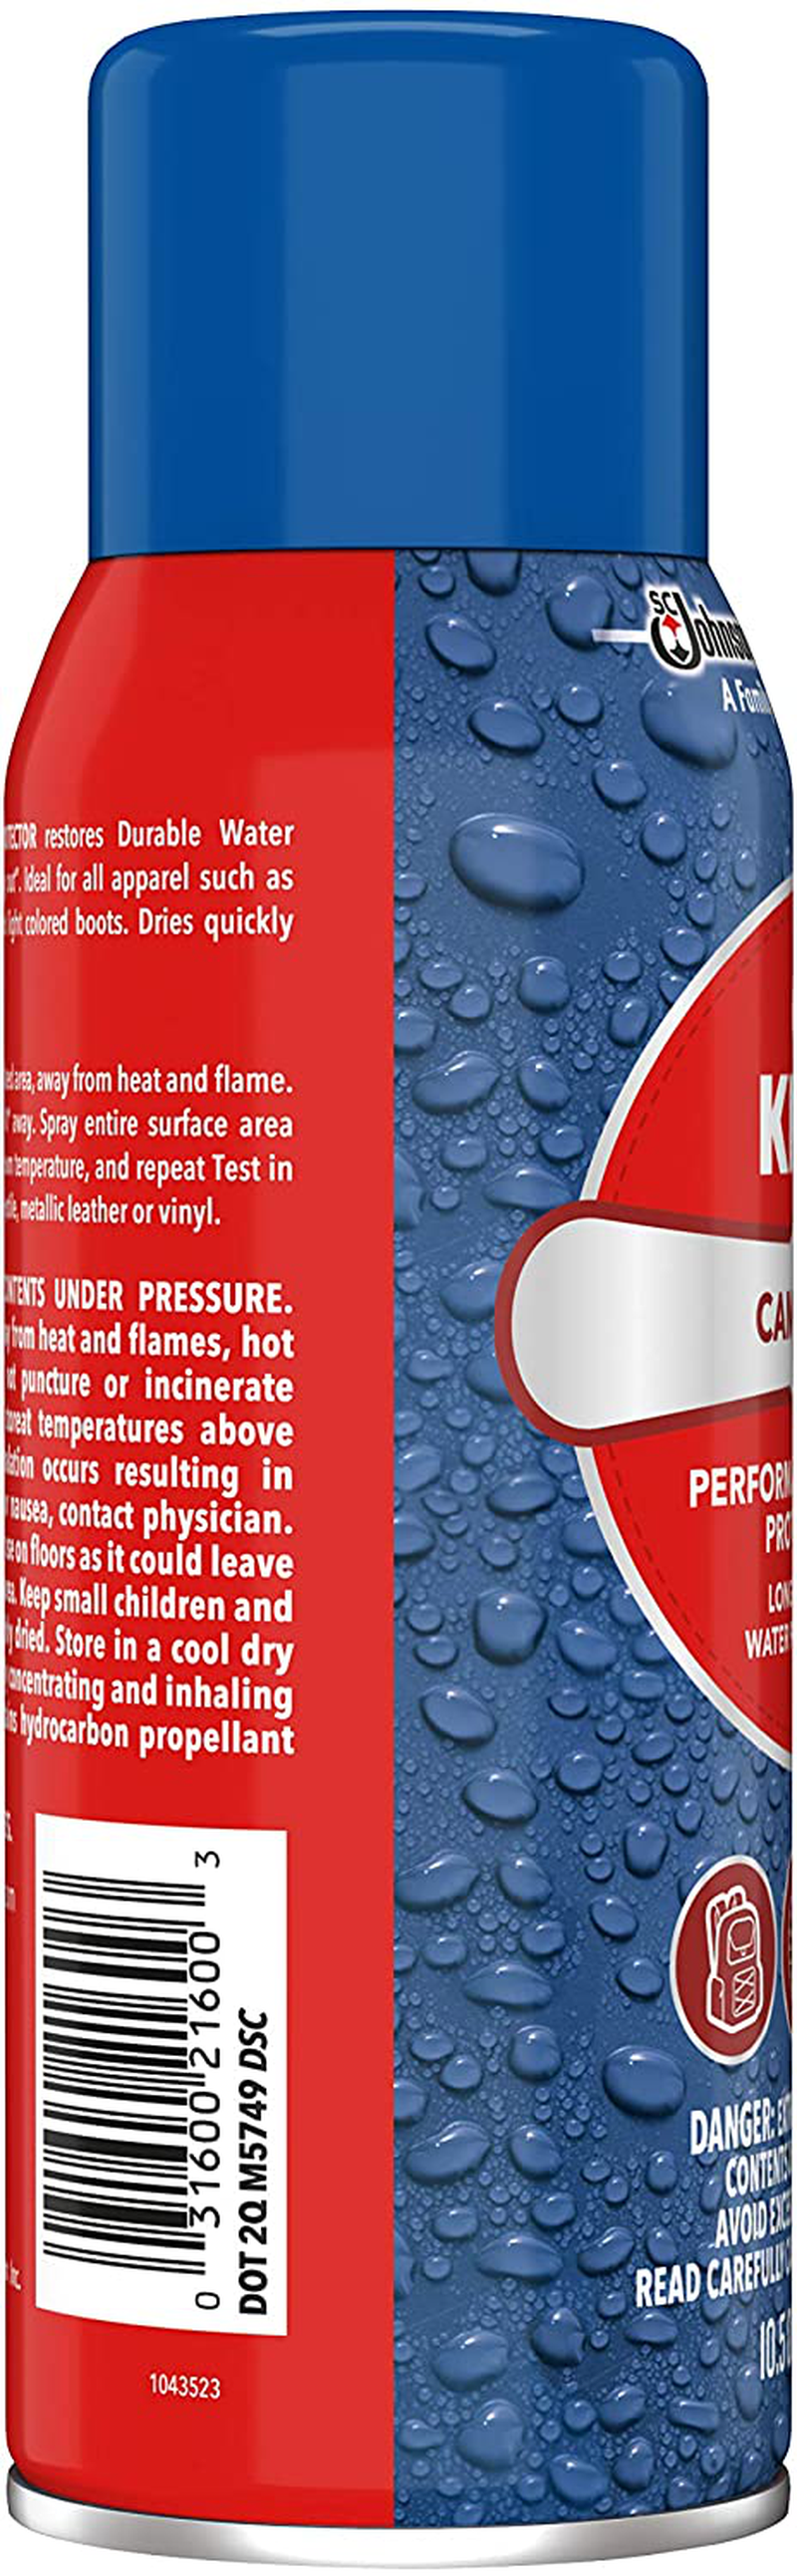 KIWI Camp Dry Performance Fabric Protector Spray - Restores Water Repellent and Provides Fabric Protection (1 Aerosol), 10.5 Oz